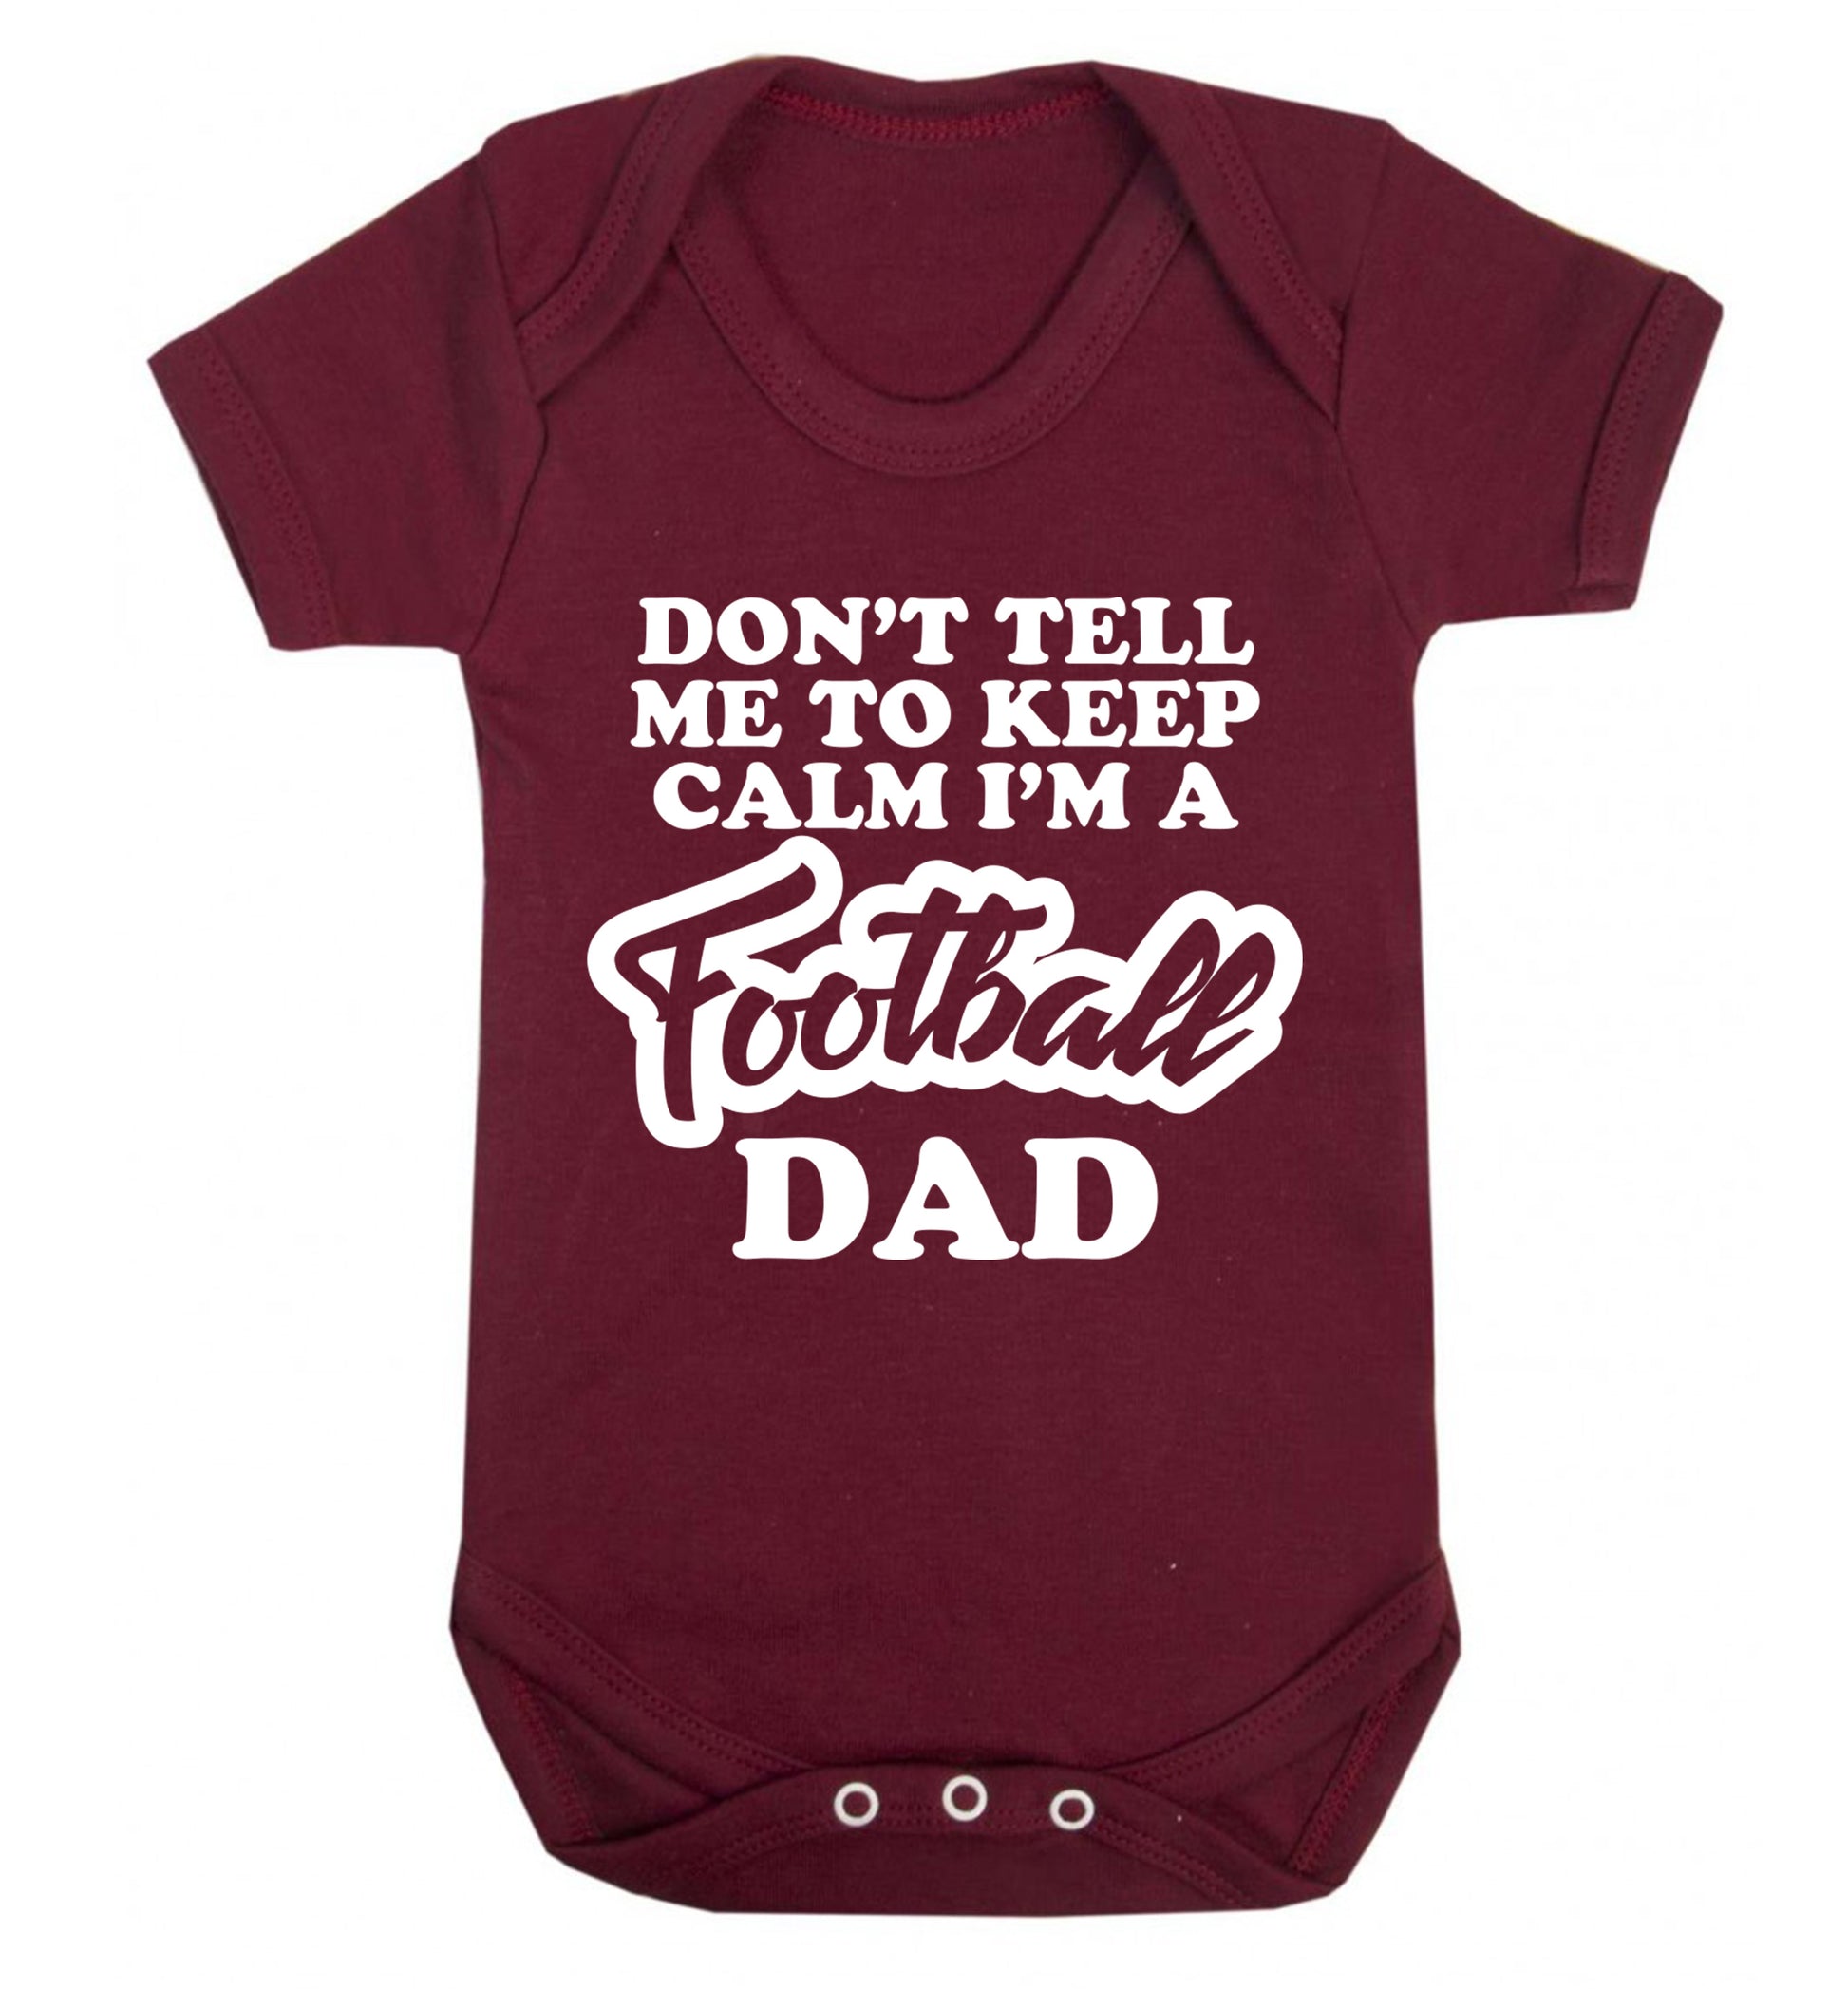 Don't tell me to keep calm I'm a football dad Baby Vest maroon 18-24 months